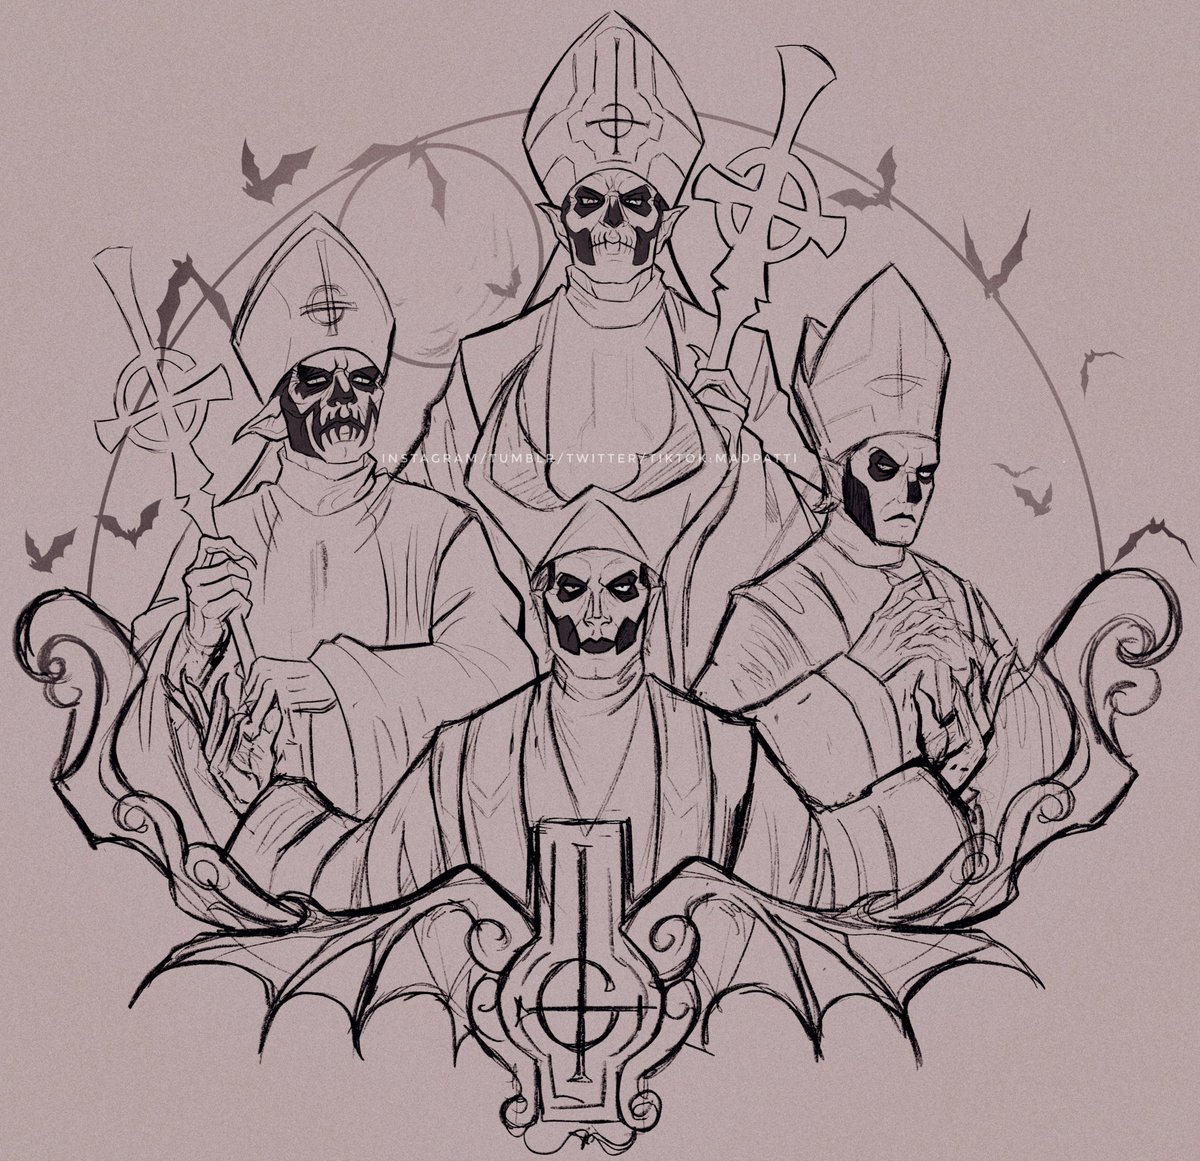 Another wip. Did a similar drawing a week ago with all papas but I didn't like it too much. So I resketched it :)